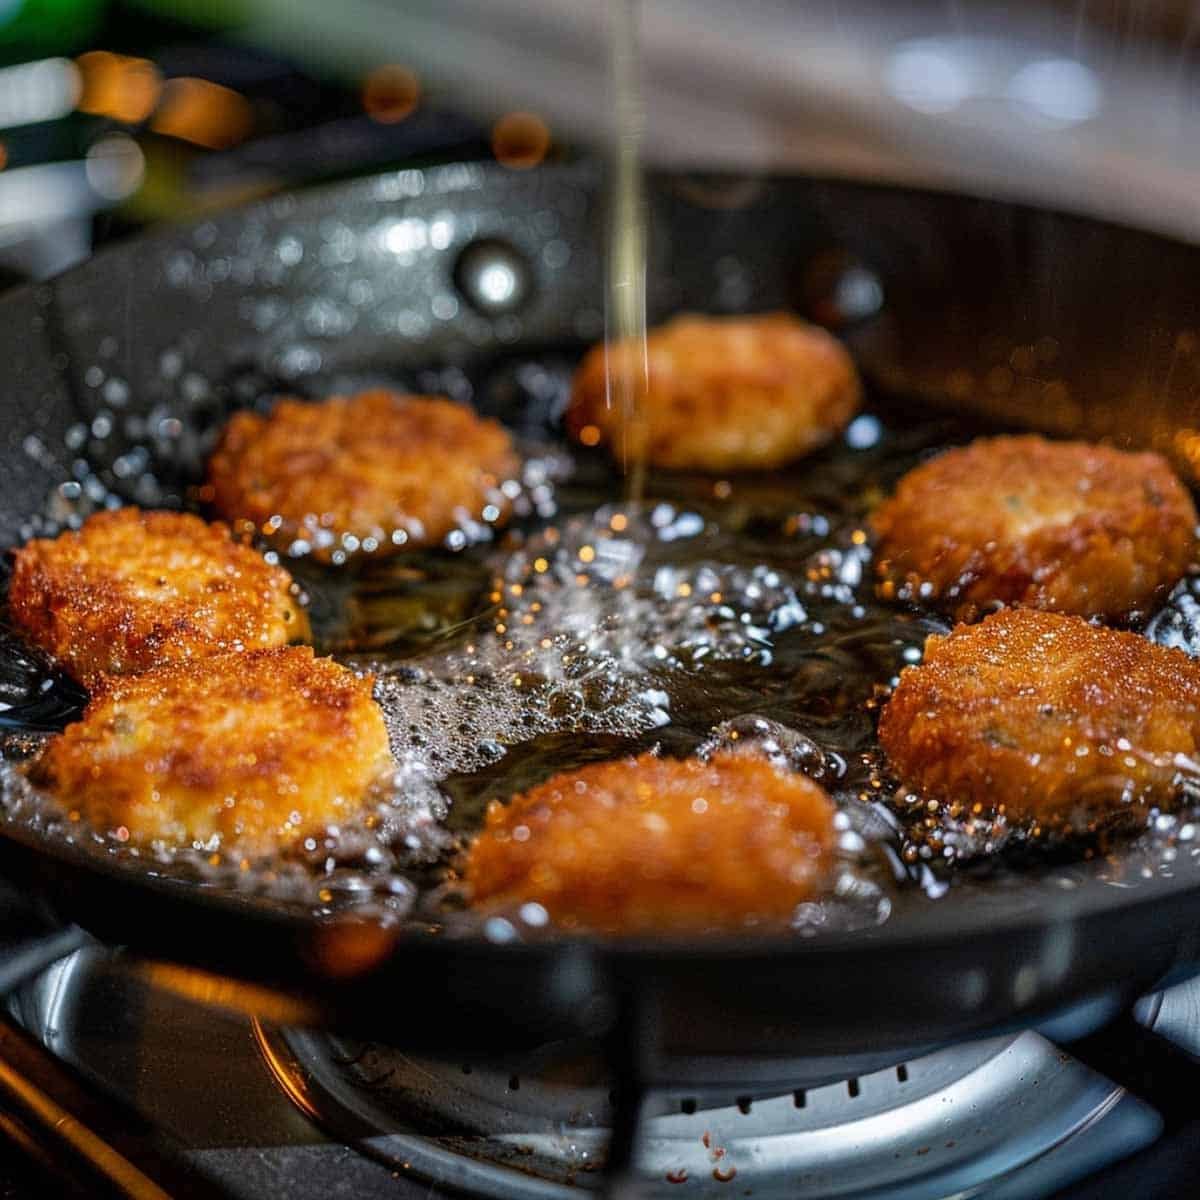 Frying fish cakes in a skillet, golden and sizzling